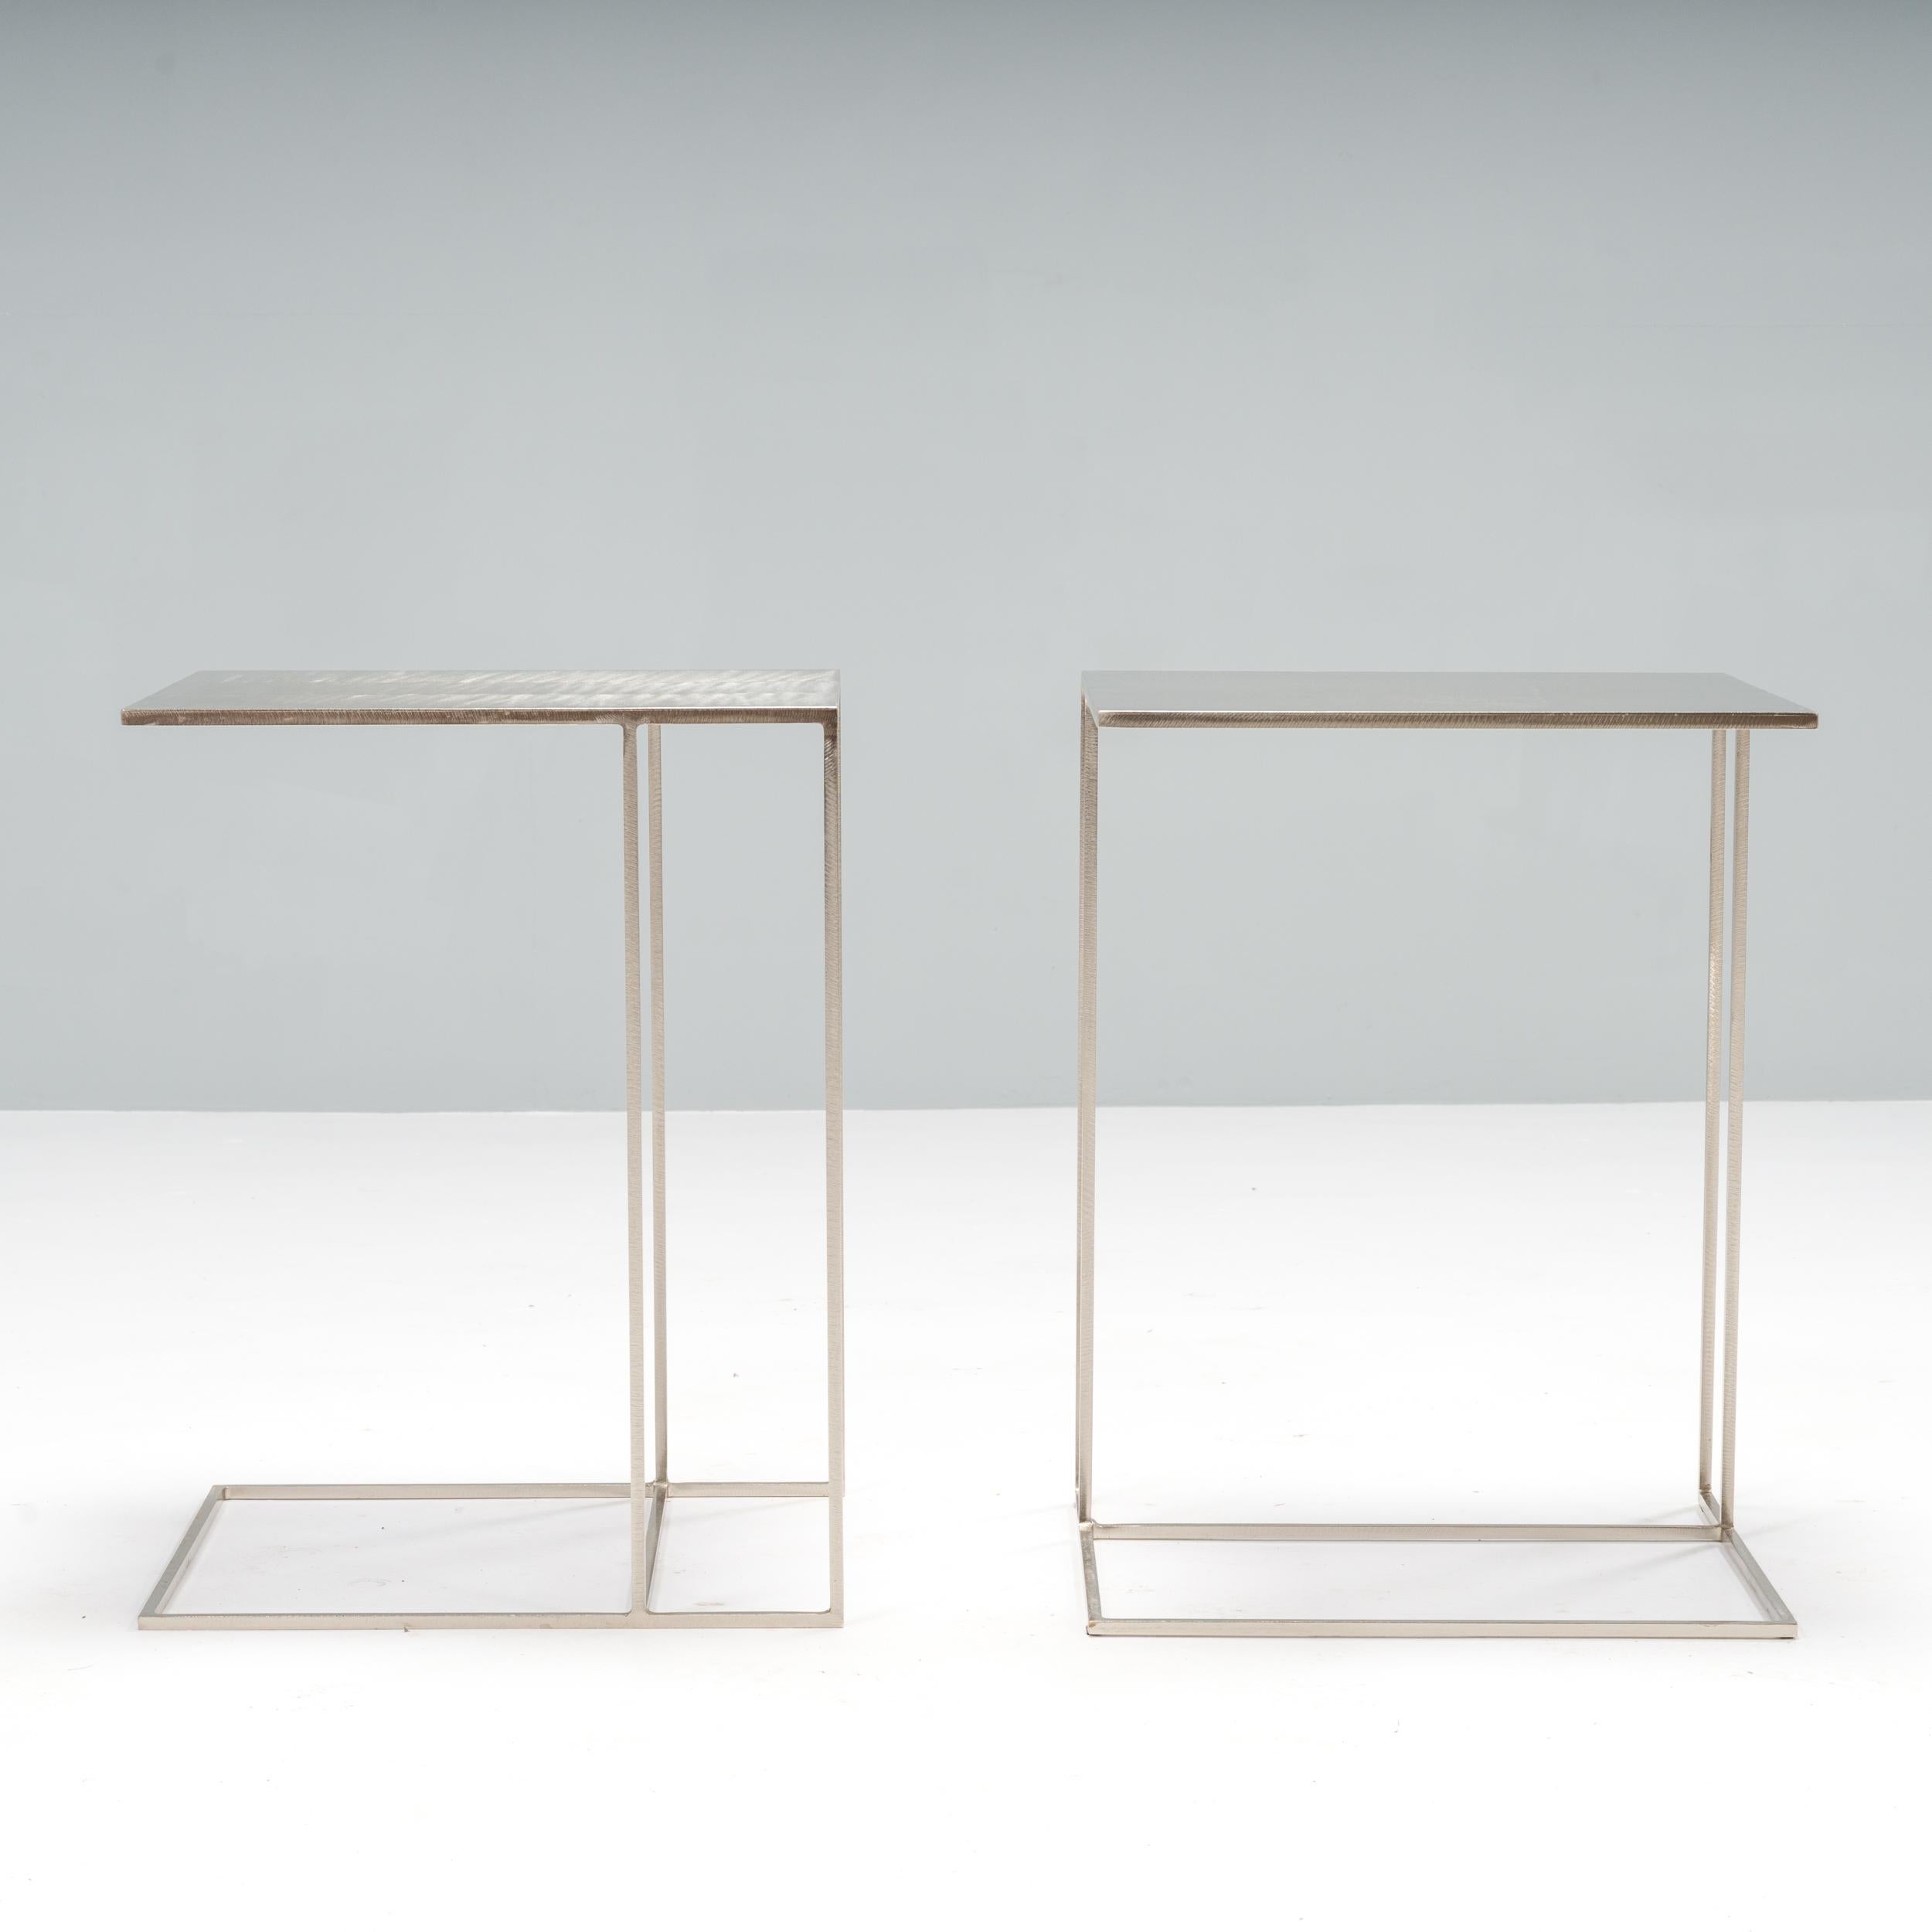 Designed by Rodolfo Dordoni for Minotti, the Leger side table formed part of the 1998 Collection which celebrated simple, elegant shapes and linear style.

Constructed from brushed steel, these two side tables have a sleek silhouette.

The